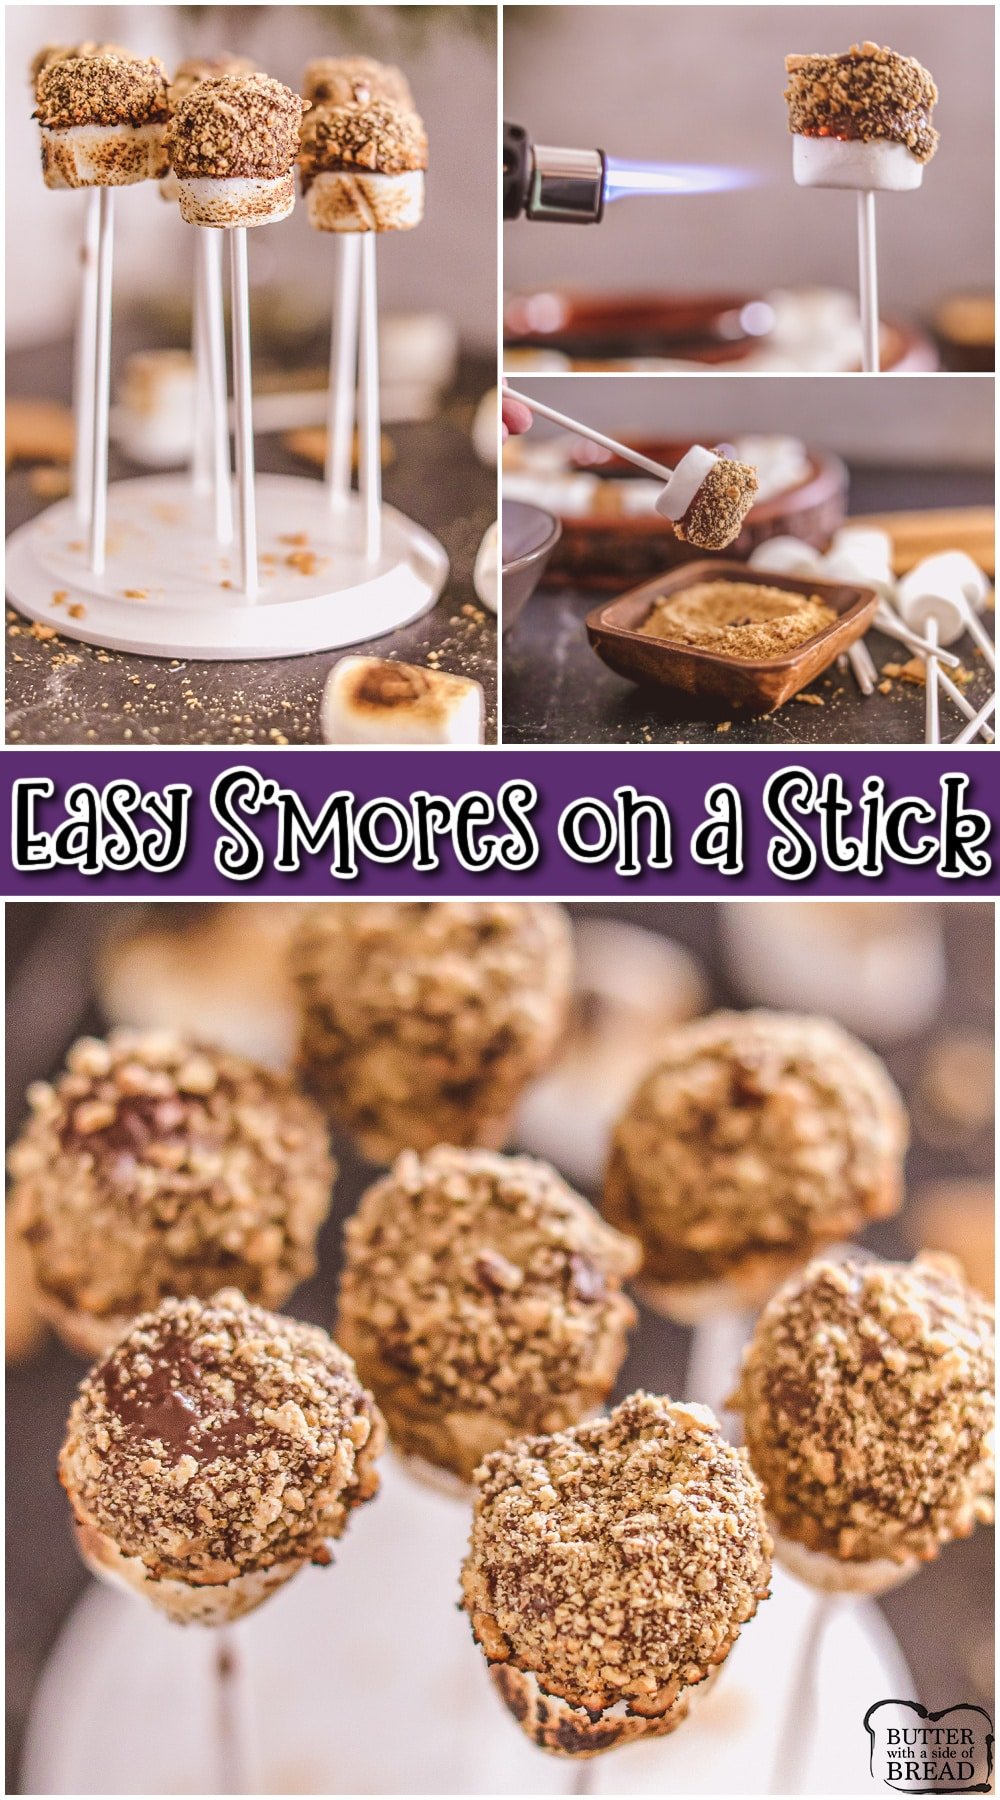 S'mores on a Stick are a fun twist on traditional s'mores! Making these chocolate covered smores on a stick is simple & only requires 3 ingredients: marshmallows, chocolate + graham crackers! 